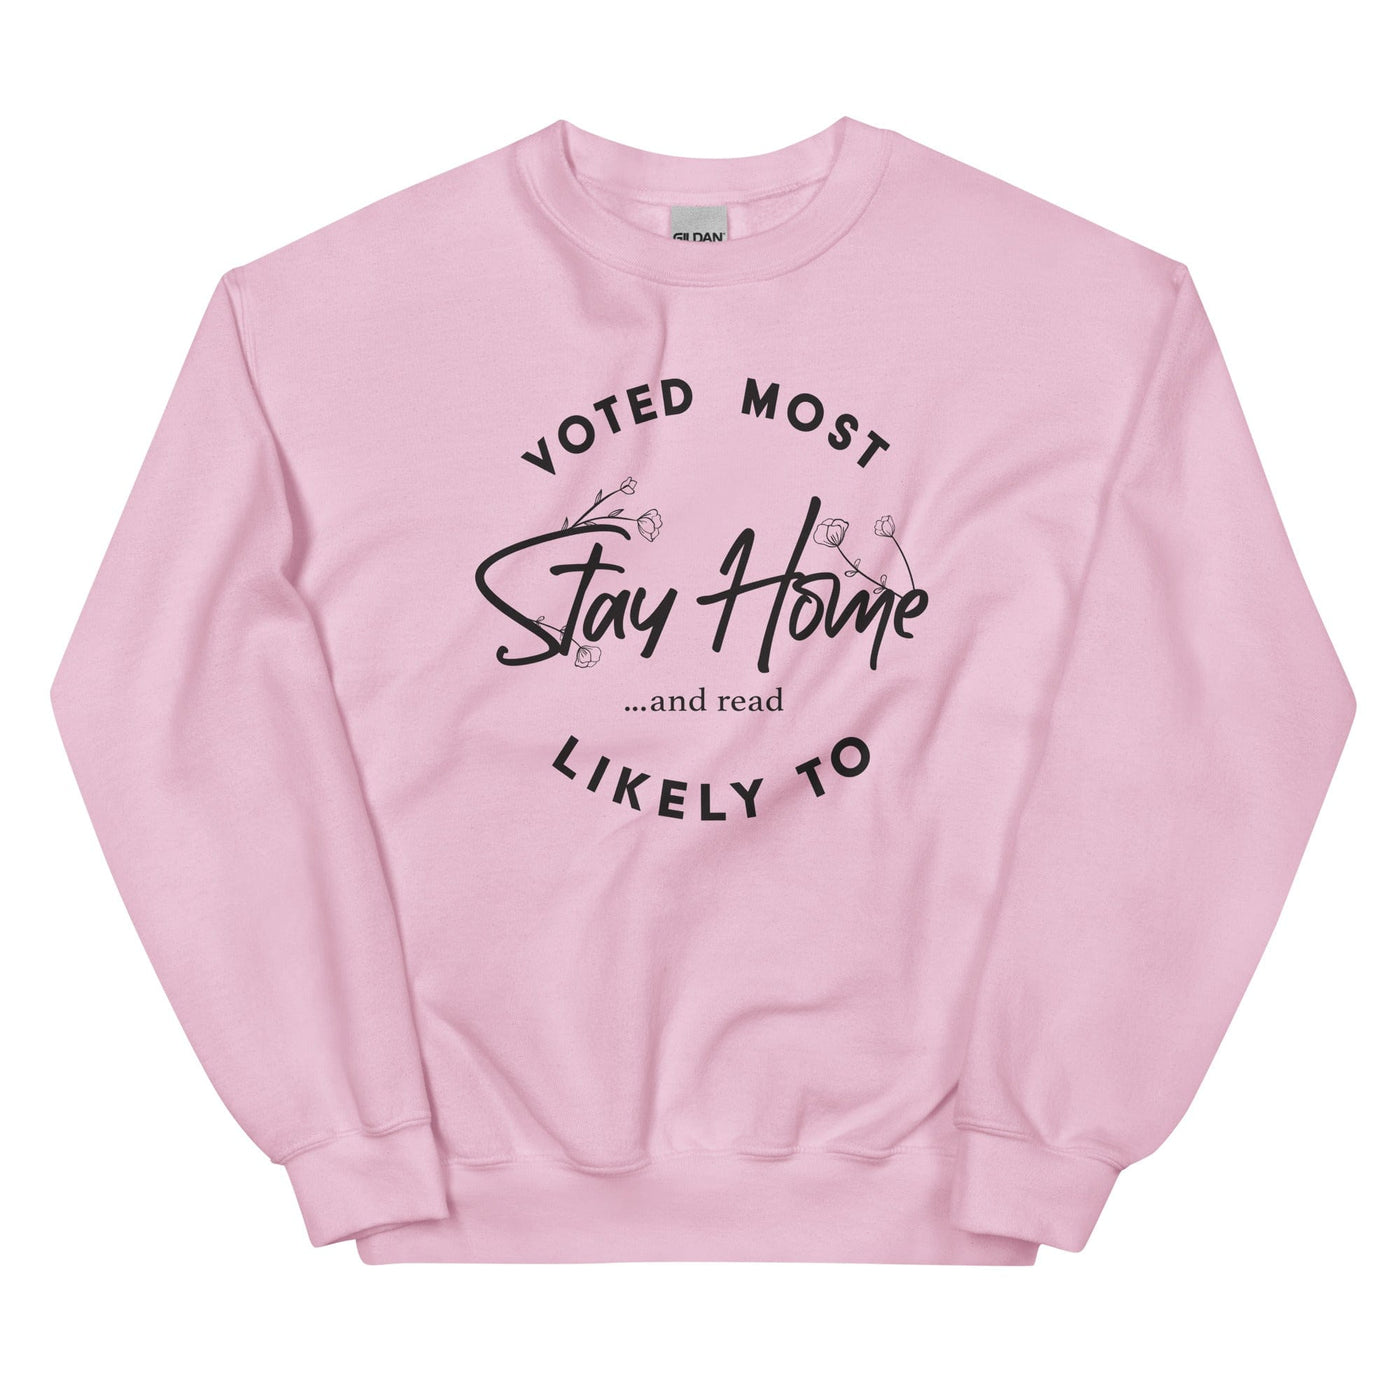 Lit Haven Booktique Sweatshirt Light Pink / S Voted Most Likely to Stay Home & Read crew neck sweatshirt